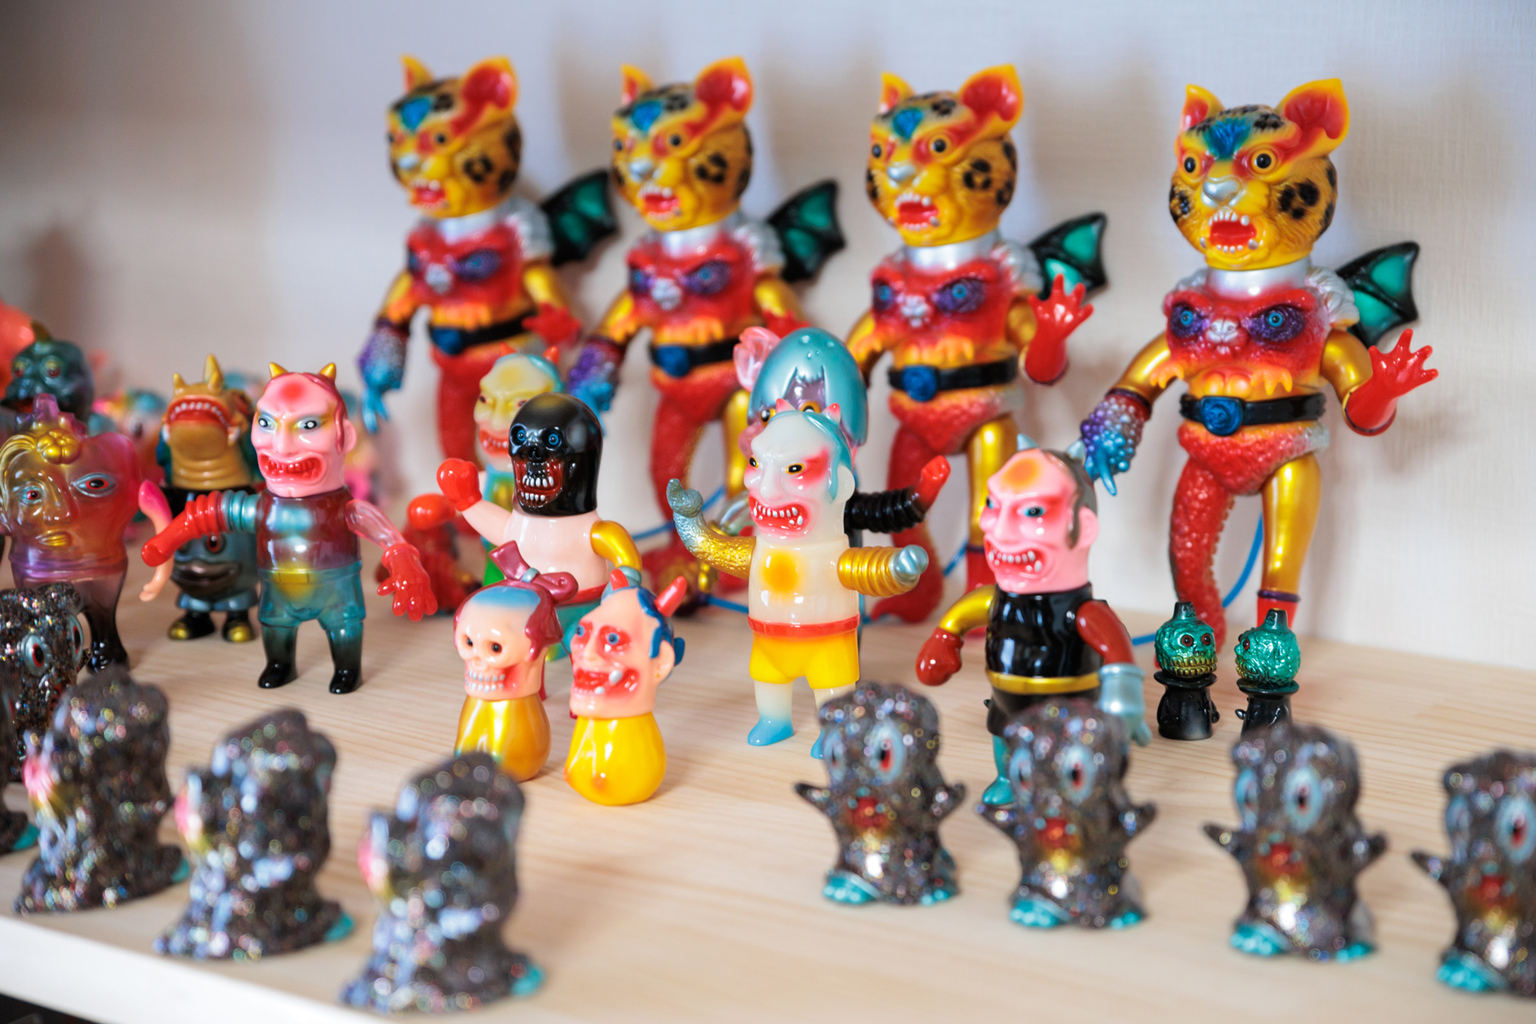 Japan's Artisan-Made Vinyl Toys Are Making Collectors Go Wild